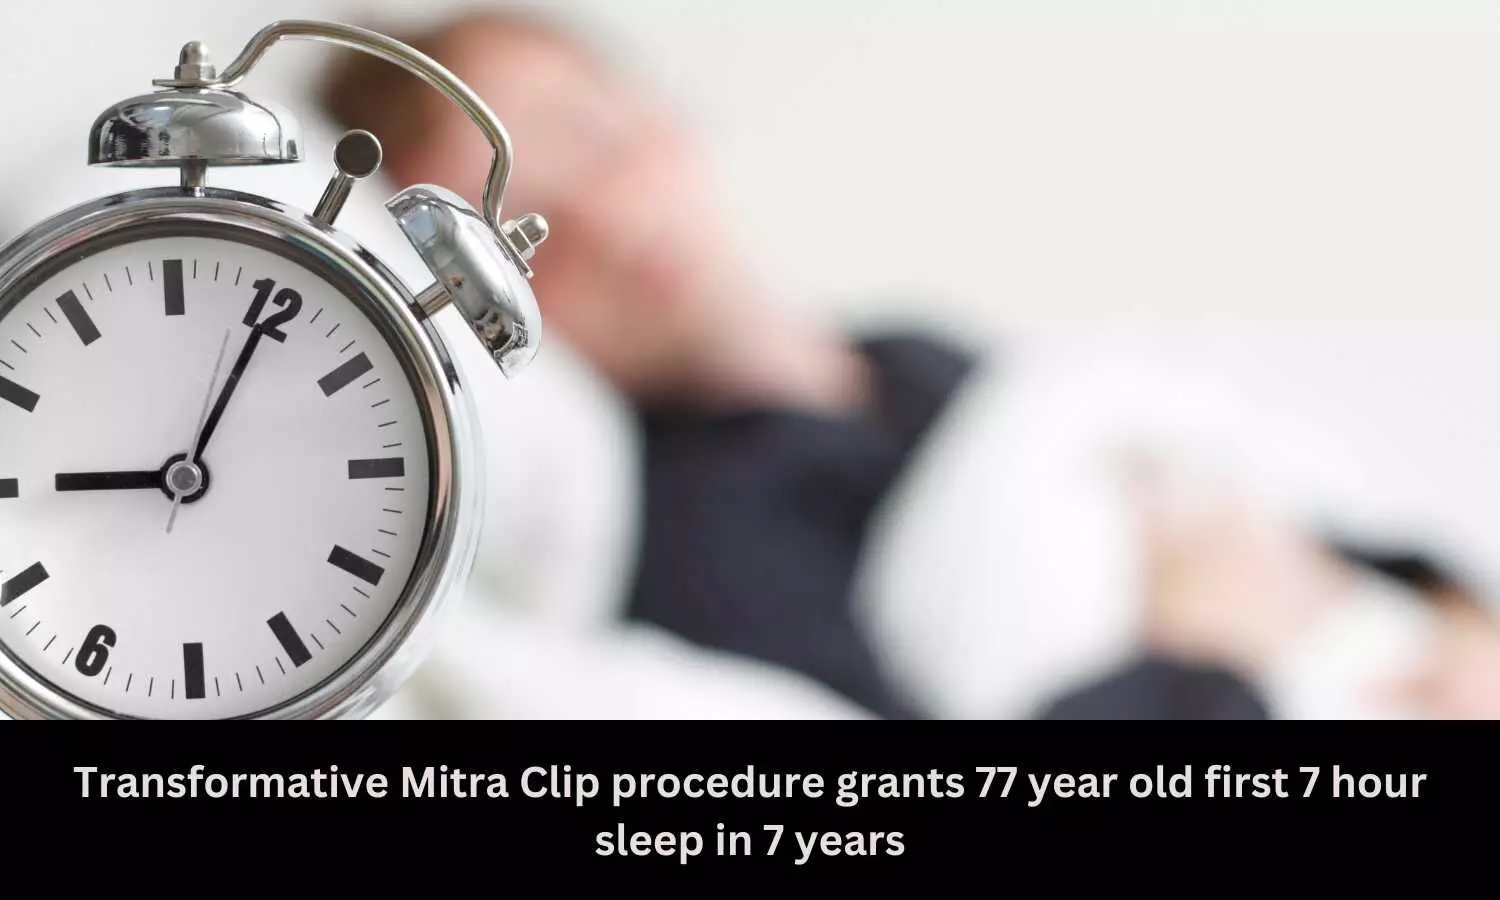 Transformative Mitra Clip procedure grants 77 year old first 7 hour sleep in 7 years